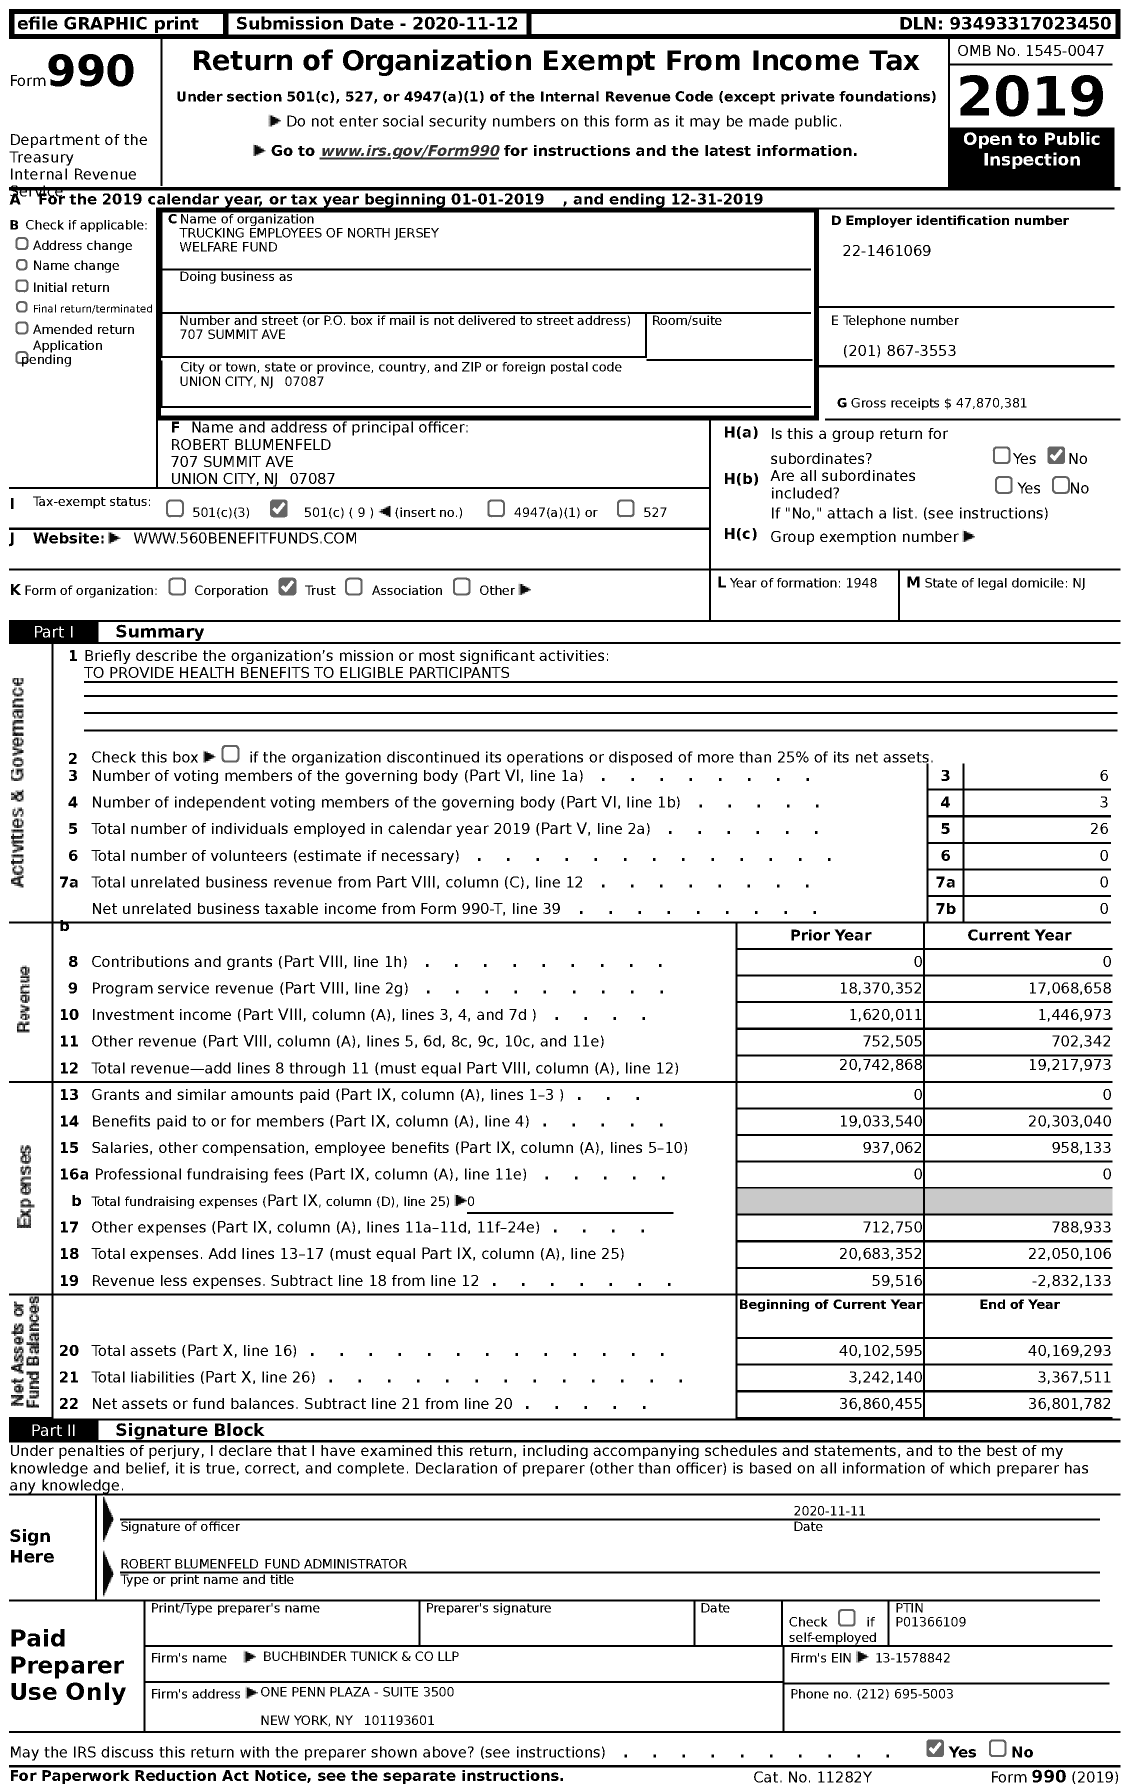 Image of first page of 2019 Form 990 for Trucking Employees of North Jersey Welfare Fund